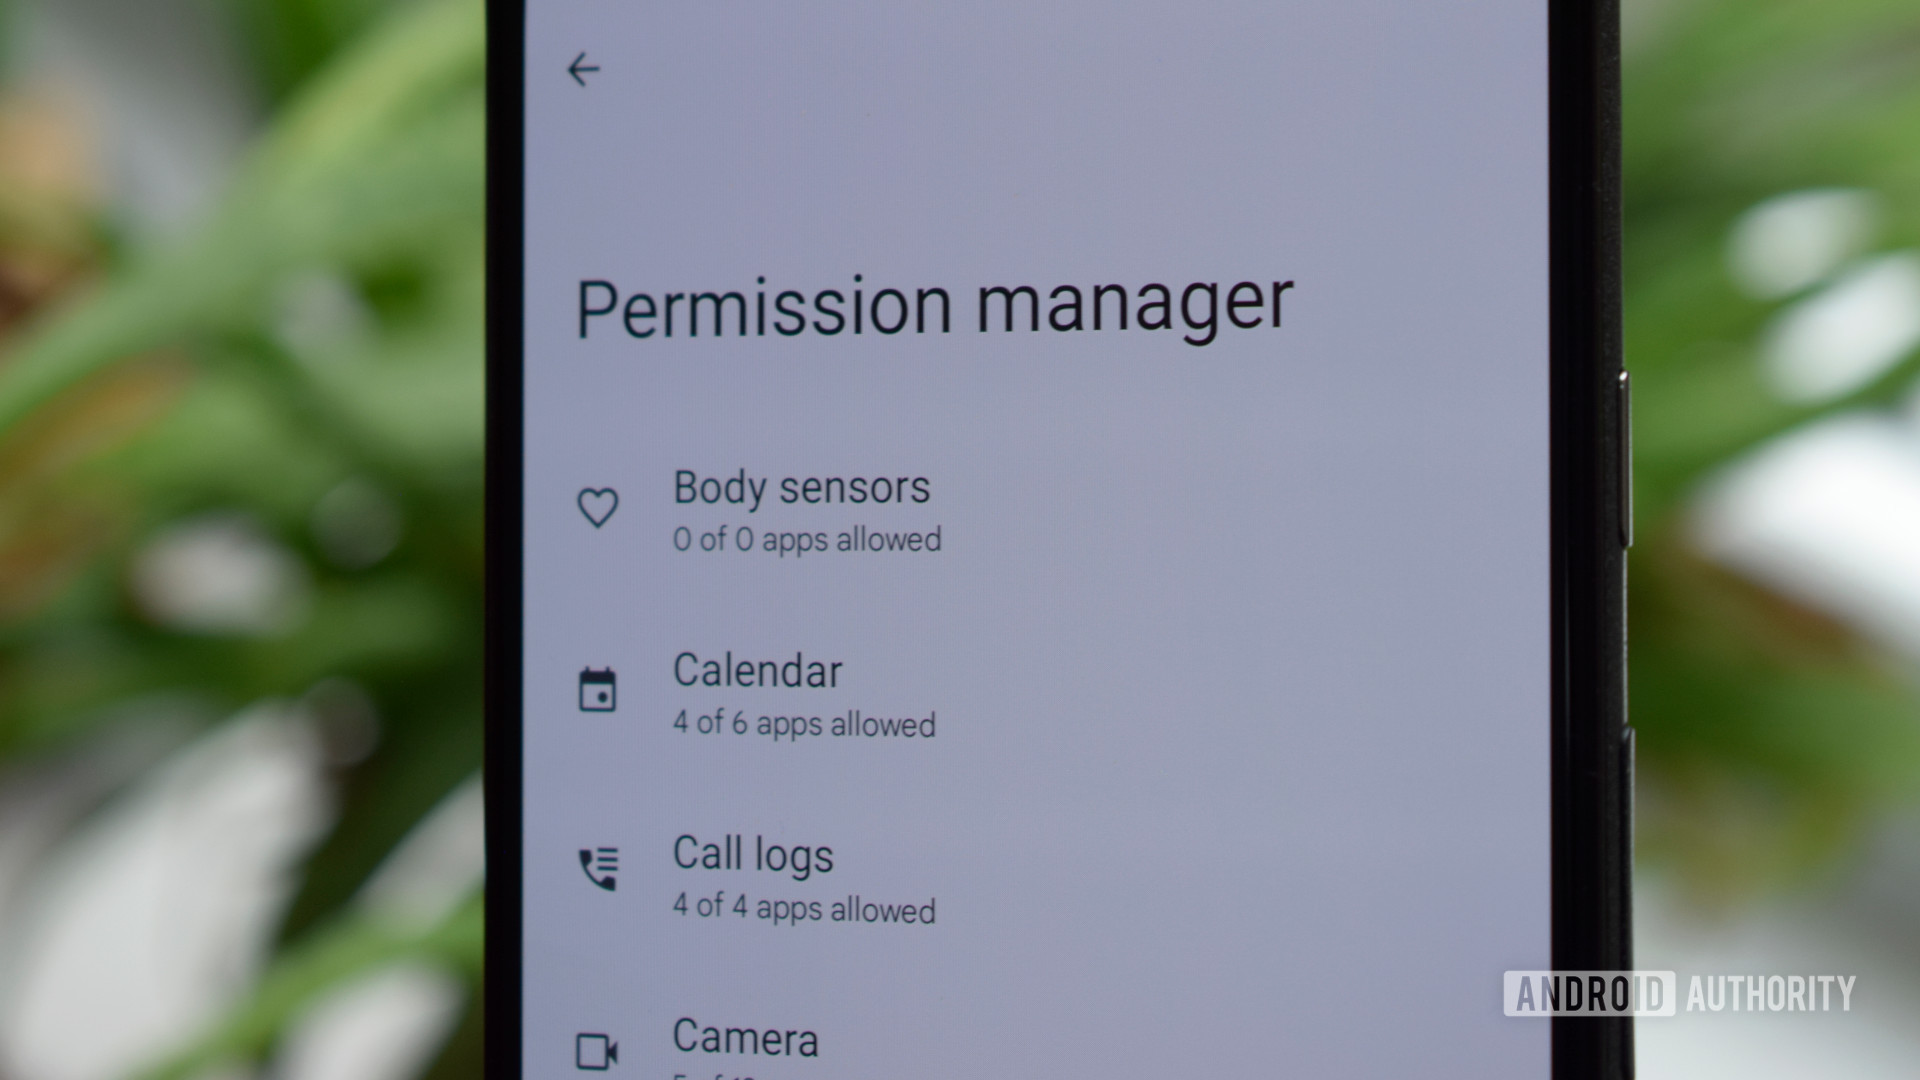 Understanding camera app permissions: Learn about the importance of camera app permissions and how they impact the functionality of your Android device.
Checking camera app permissions: Discover how to verify the current camera app permissions on your Android device.